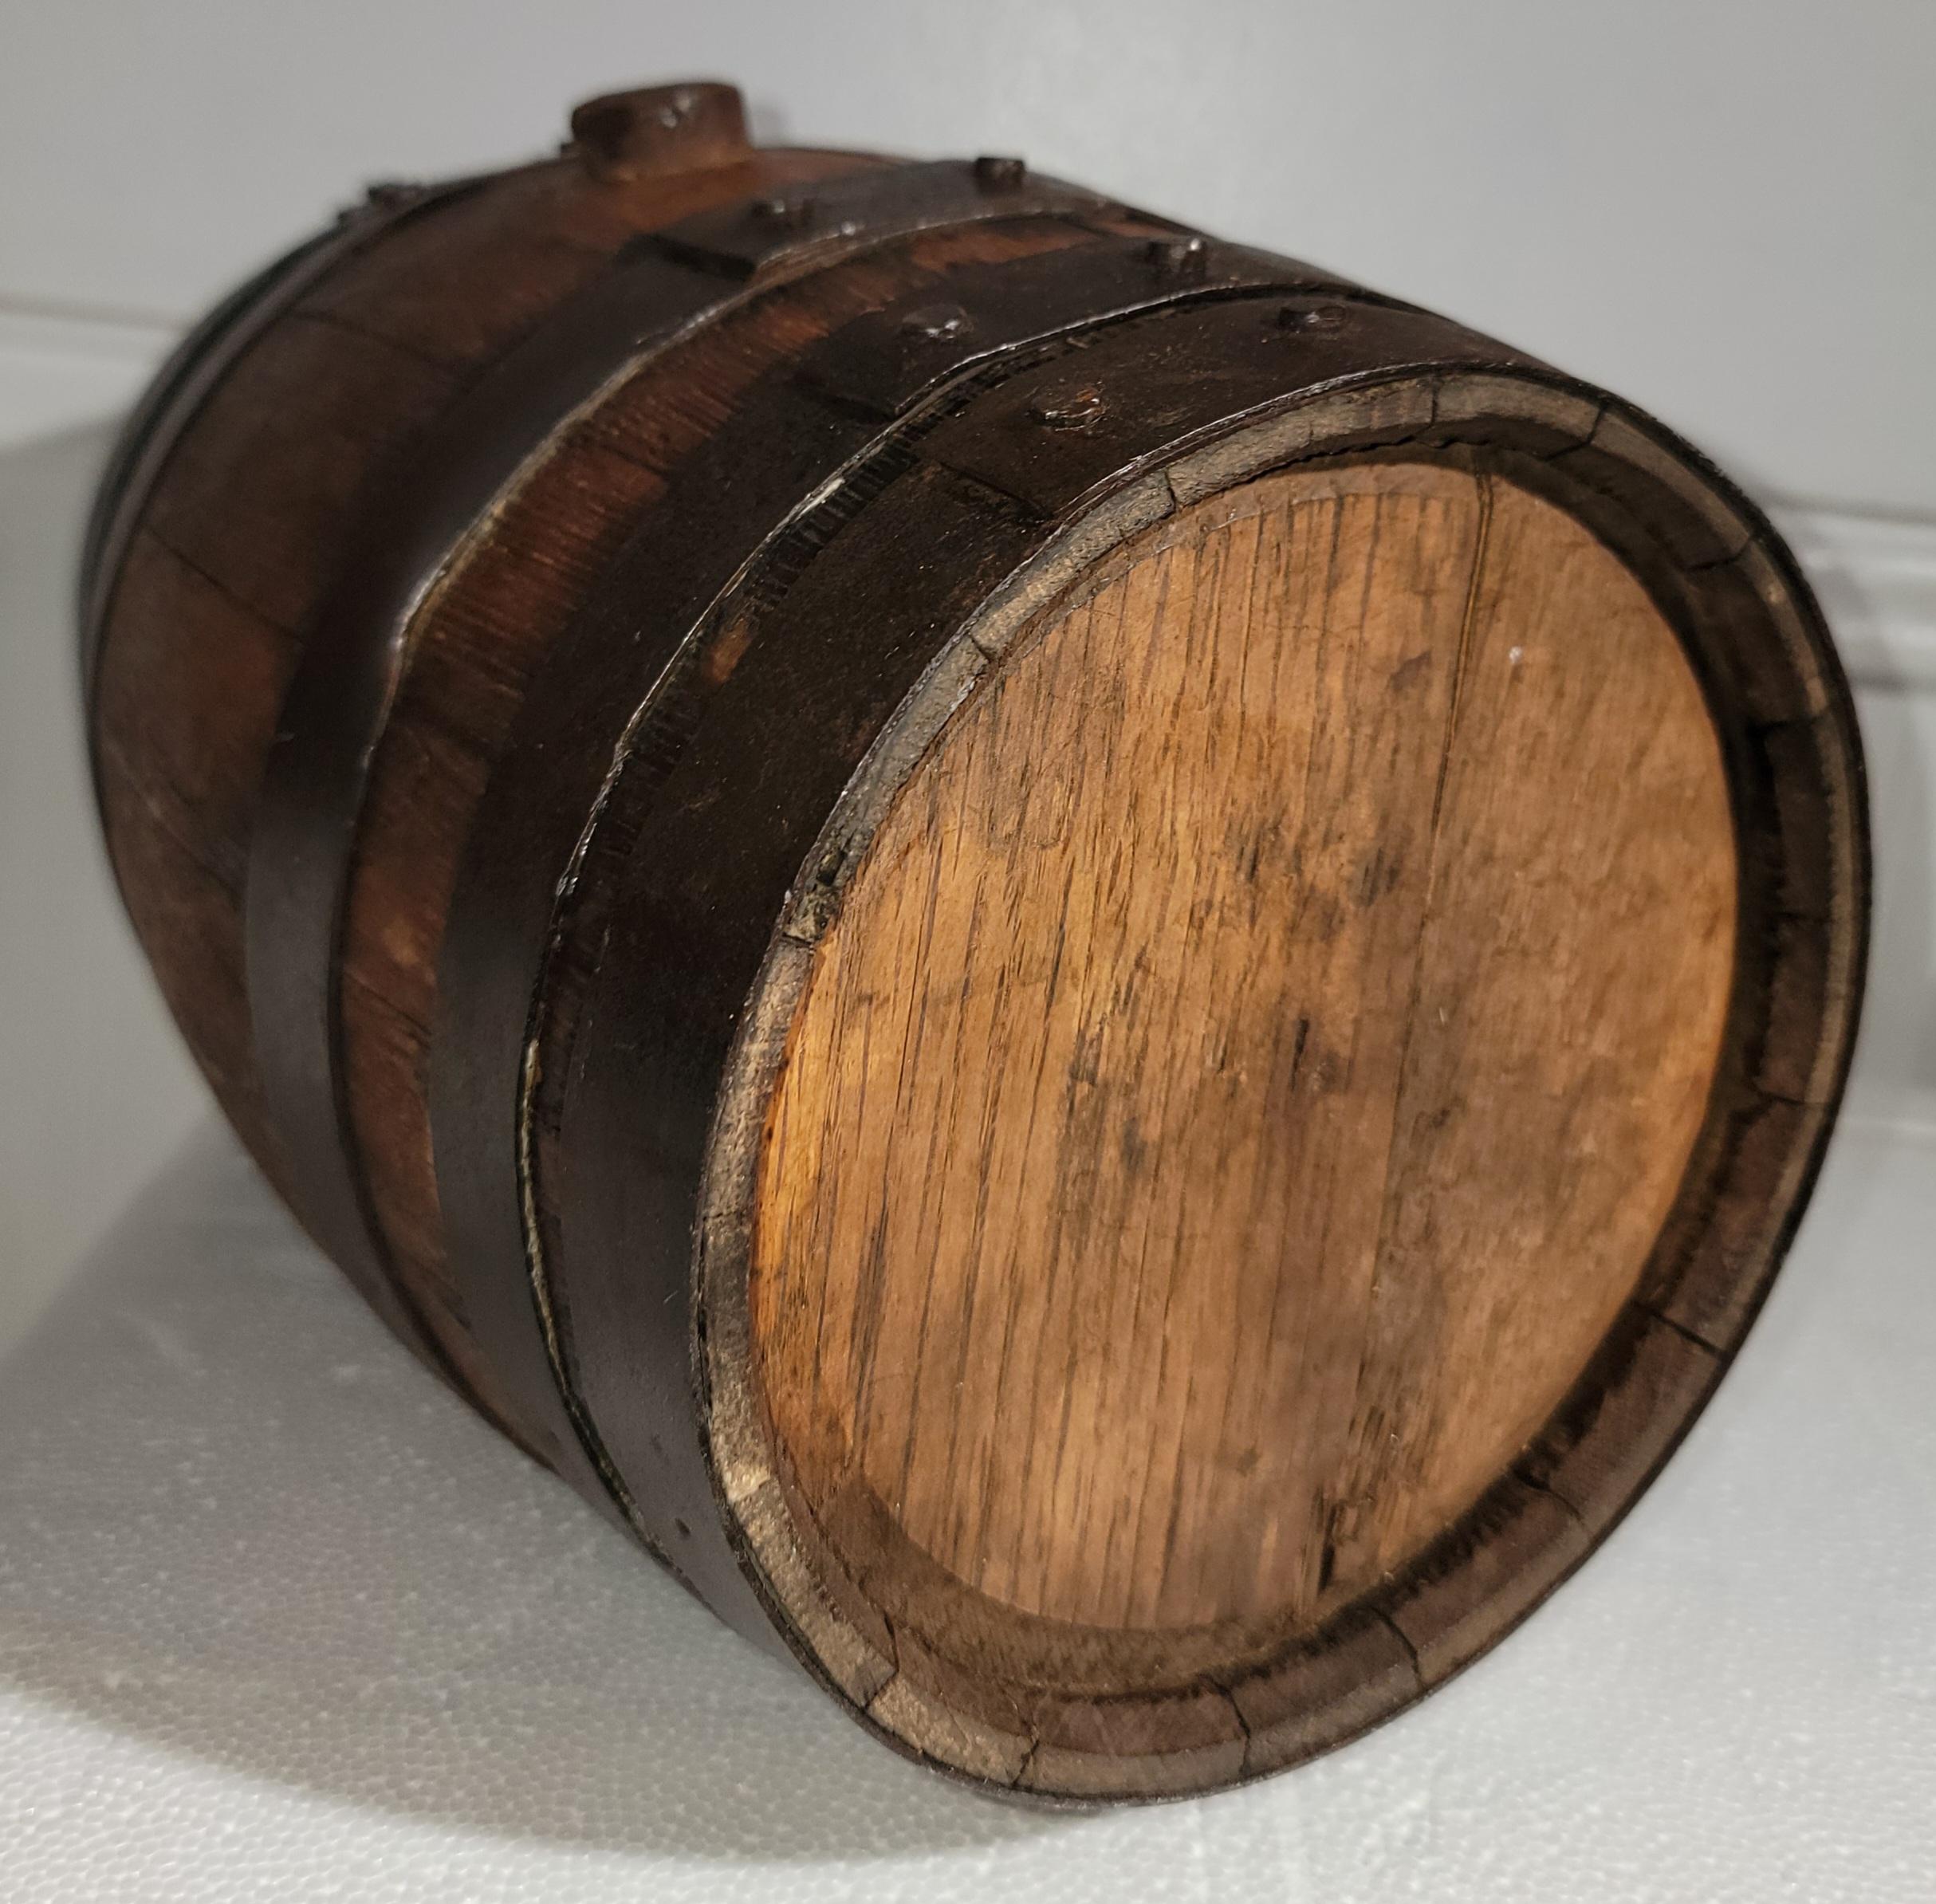 This 19thc primitive whiskey barrel was found on a ranch in the mid west and is in fine condition.The barrel is very tight and in great condition.Rare size and great on a shelf or a bar for display.